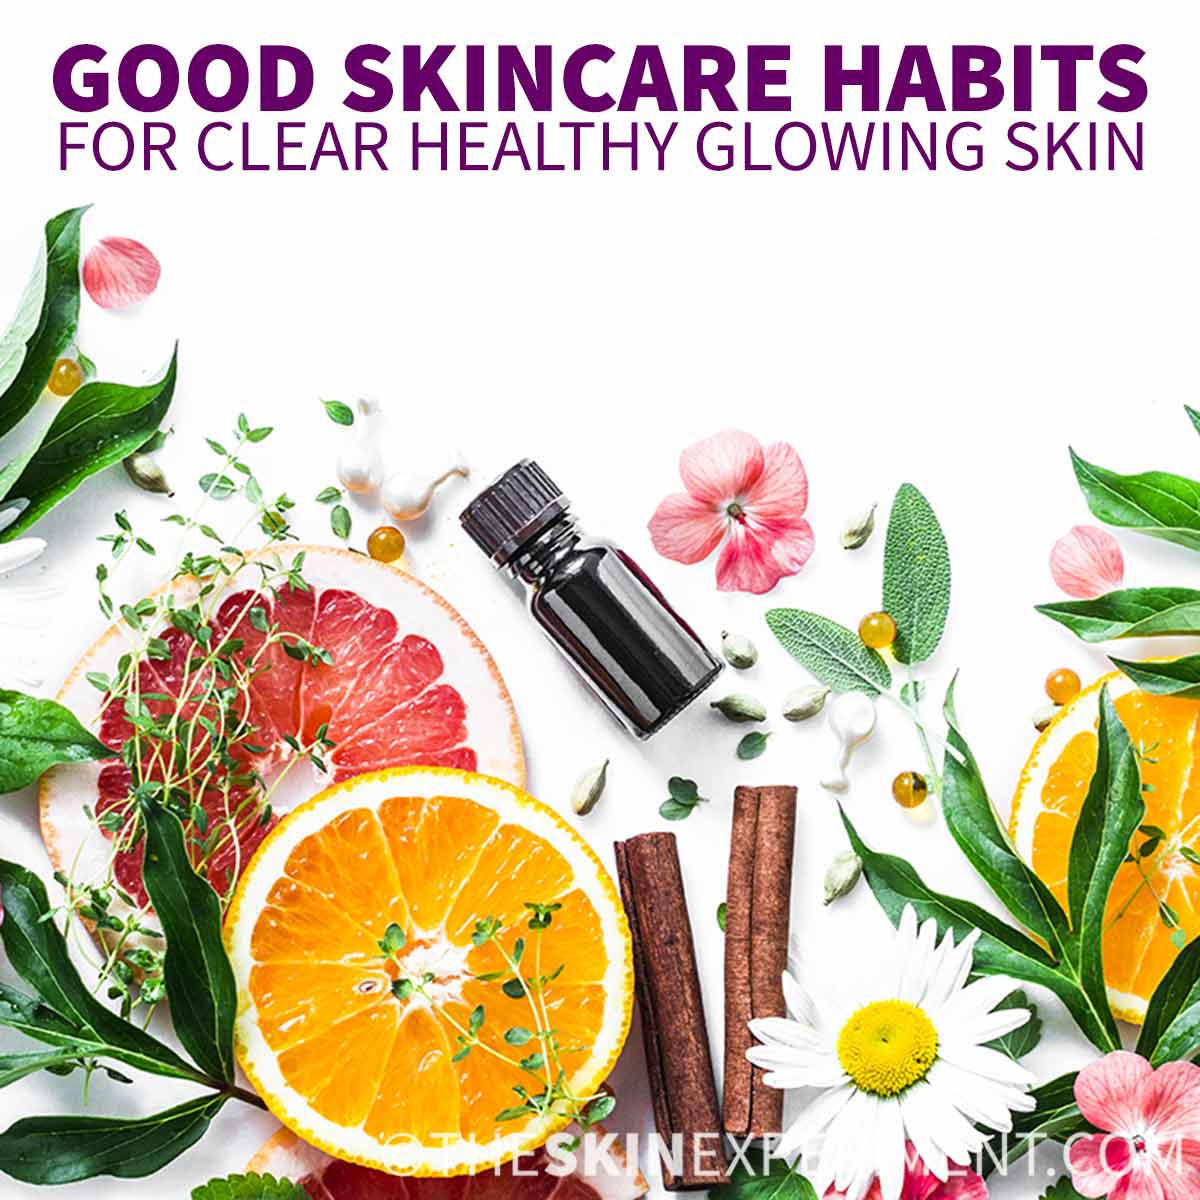 Good Skincare Habits for Clear Healthy Glowing Skin